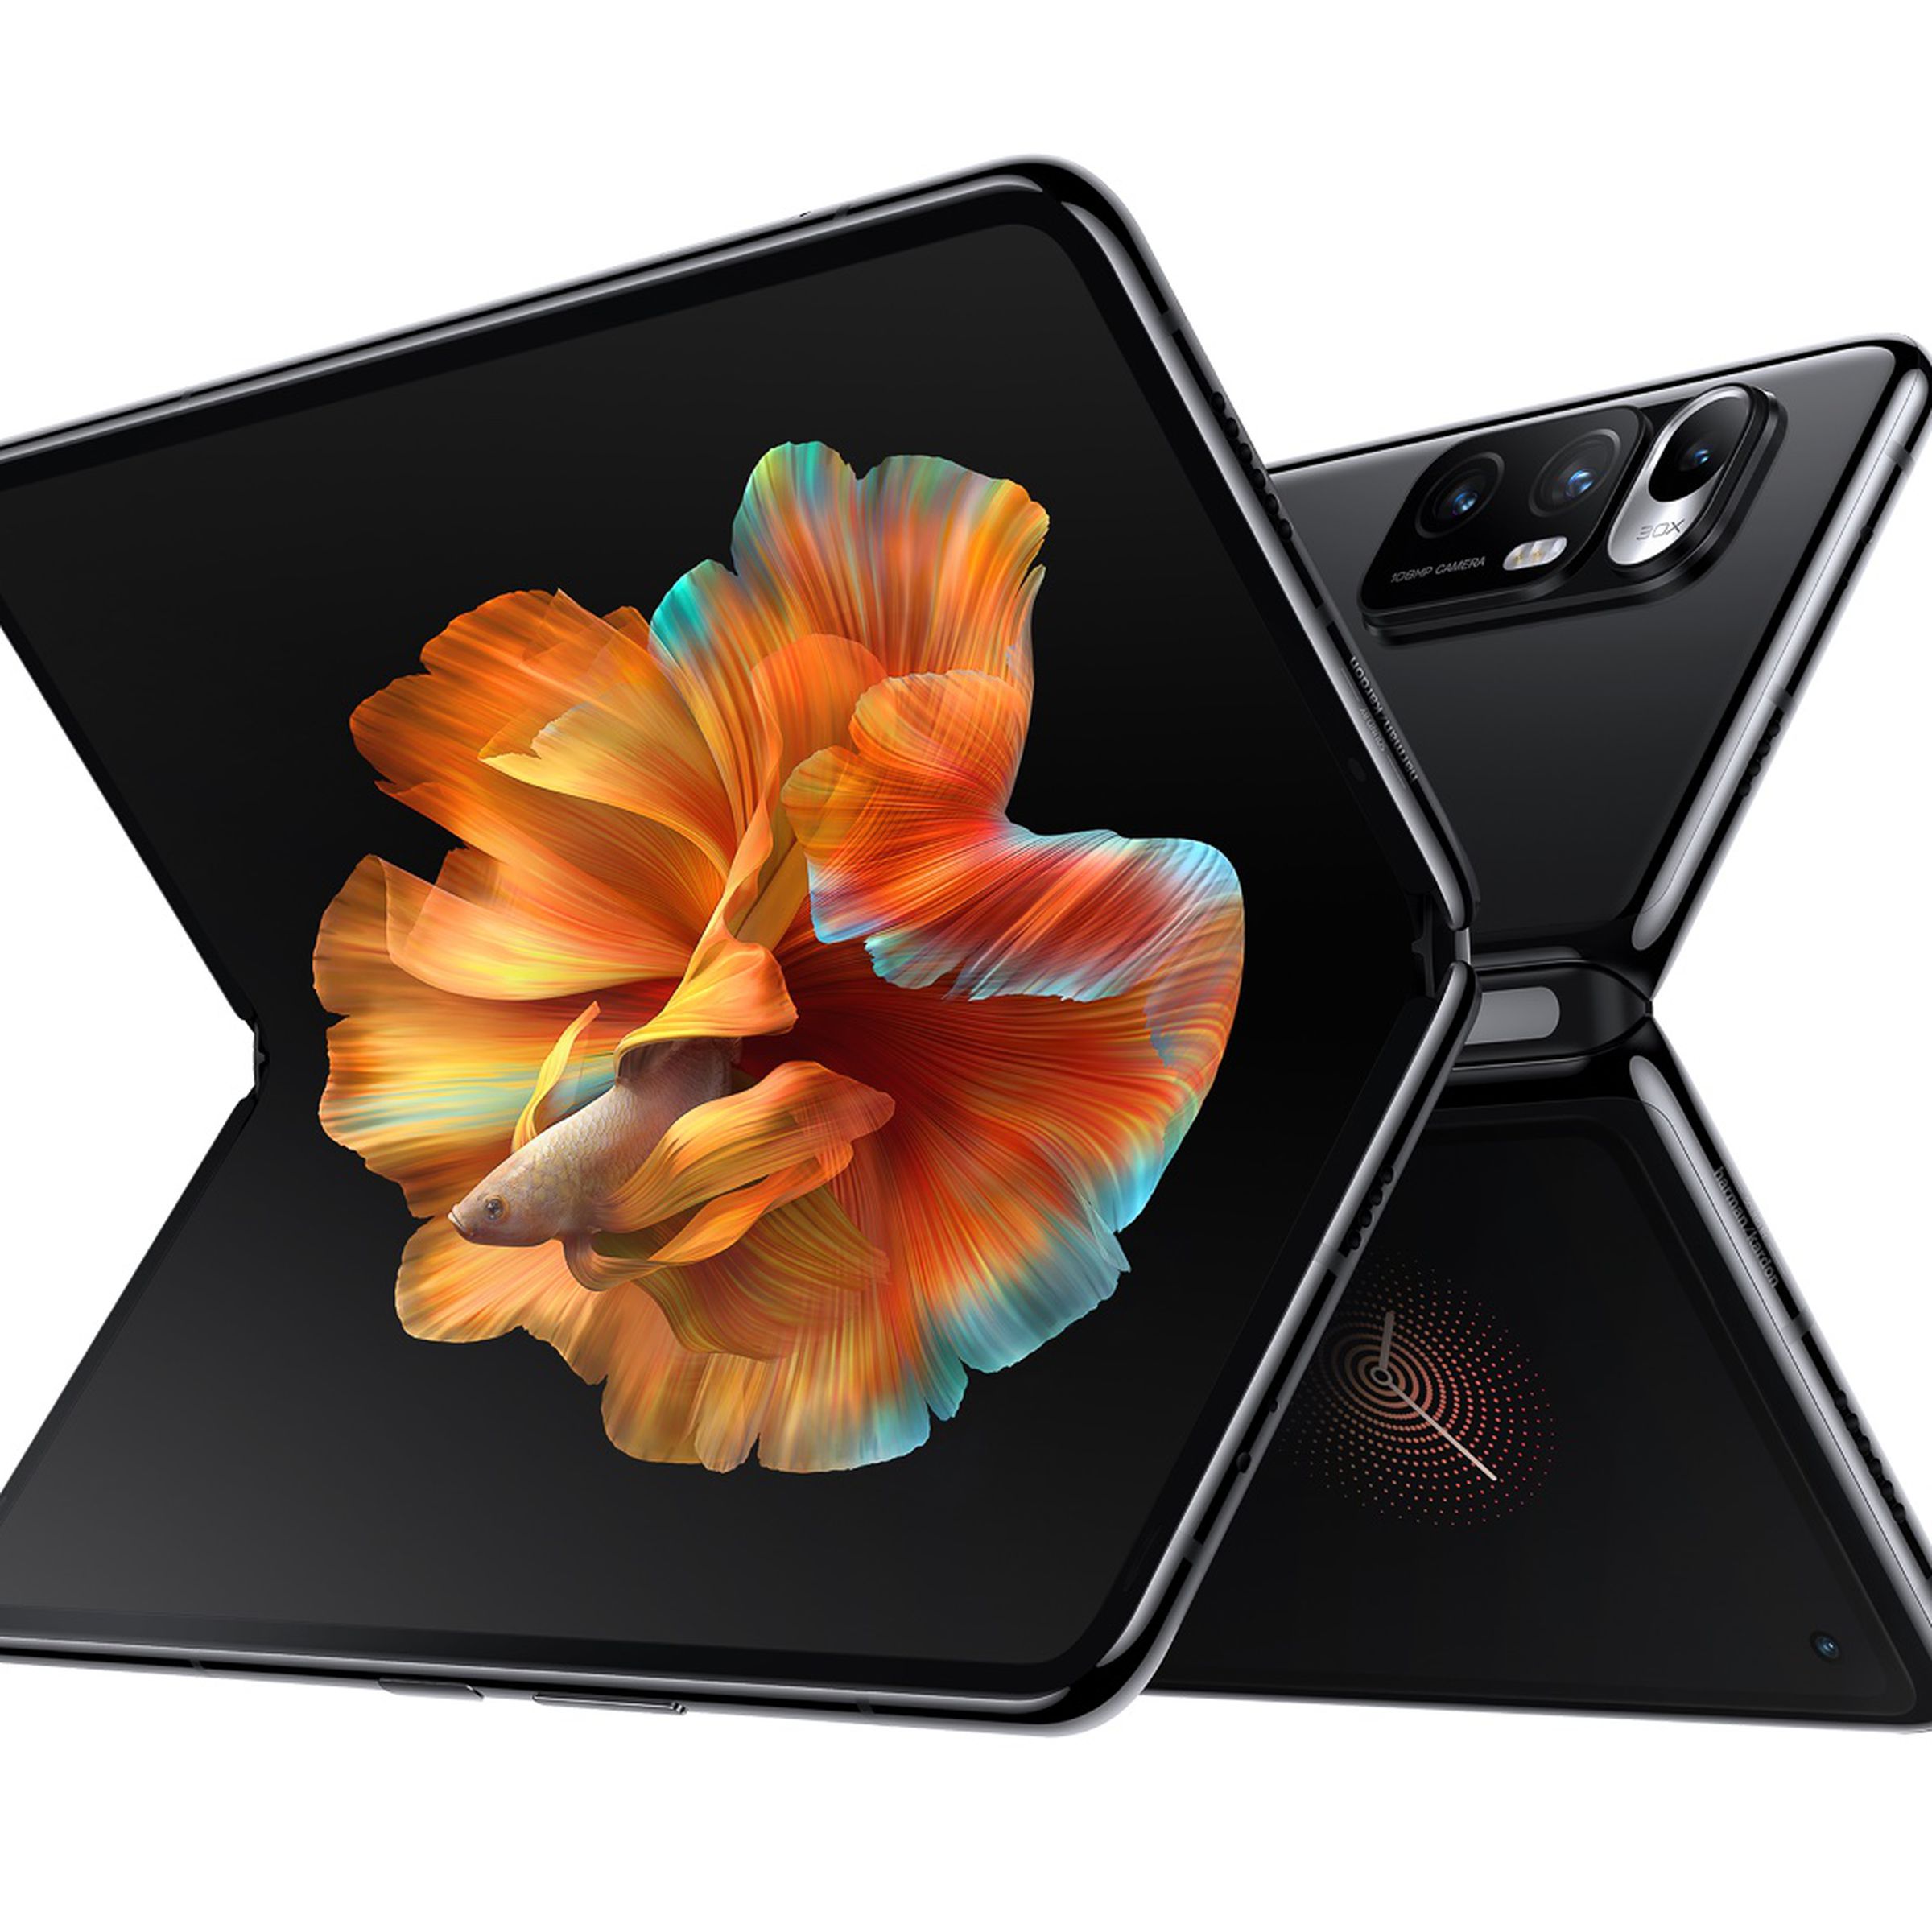 The Mi Mix Fold pairs a folding screen on the inside with a smaller outer display. 